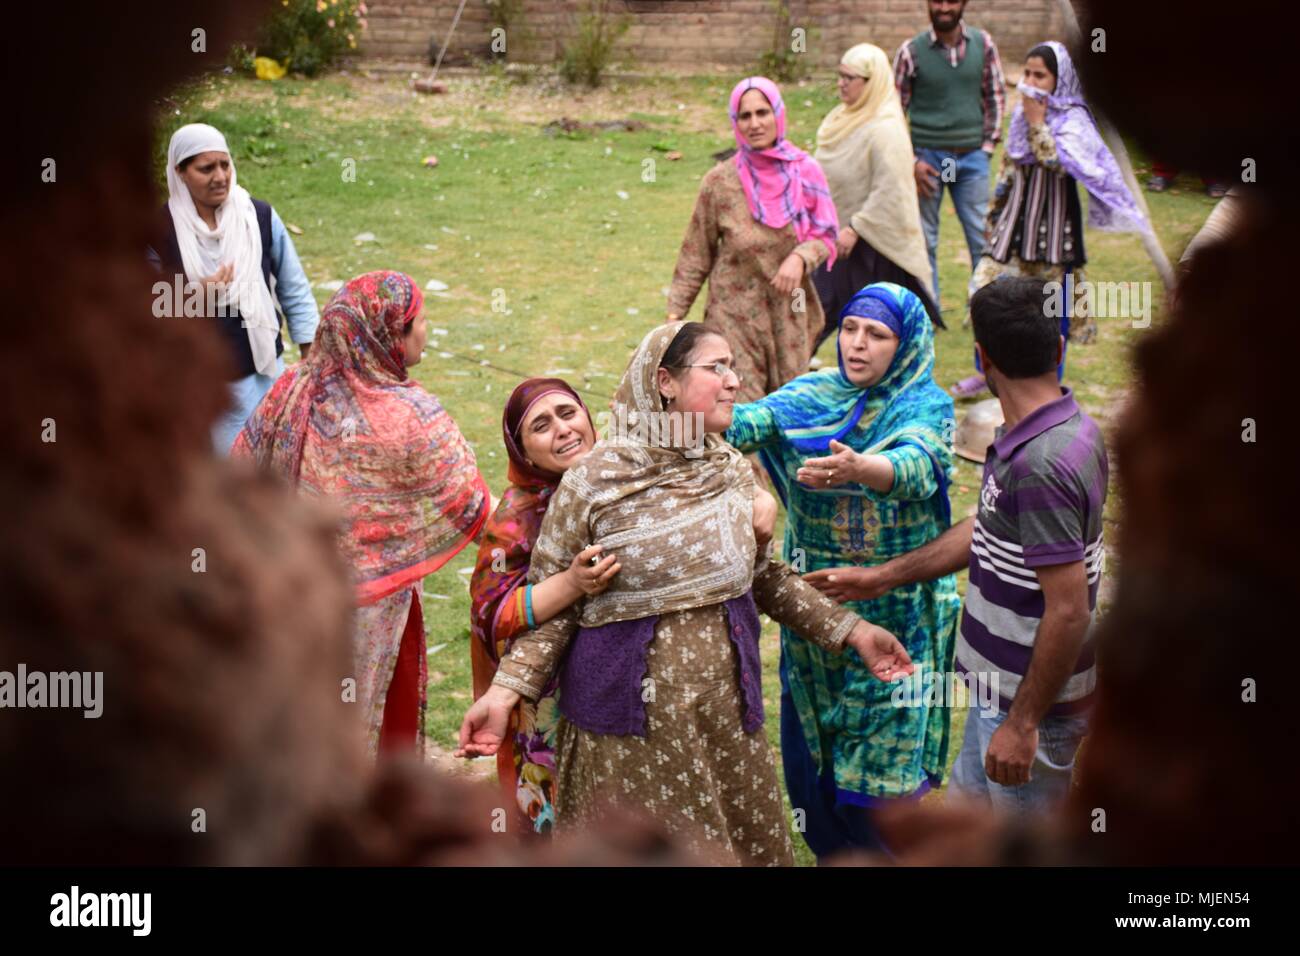 May 5, 2018 - Srinagar, Jammu & Kashmir, India - Women mourns near the Encounter site in Srinagar.4 Killed and several injured in an encounter between Indian forces and militants at chatabal area of Srinagar summer capital of Indian Kashmir on Saturday. Three militants were killed during a brief shootout after government forces laid seige around densely populated chatabal area of Srinagar. A young man also died after he was hit by the armoured vehicle during the clashes between the residents and police force as residents tried to help the Militants in escape. (Credit Image: © Abbas Idrees/SOP Stock Photo